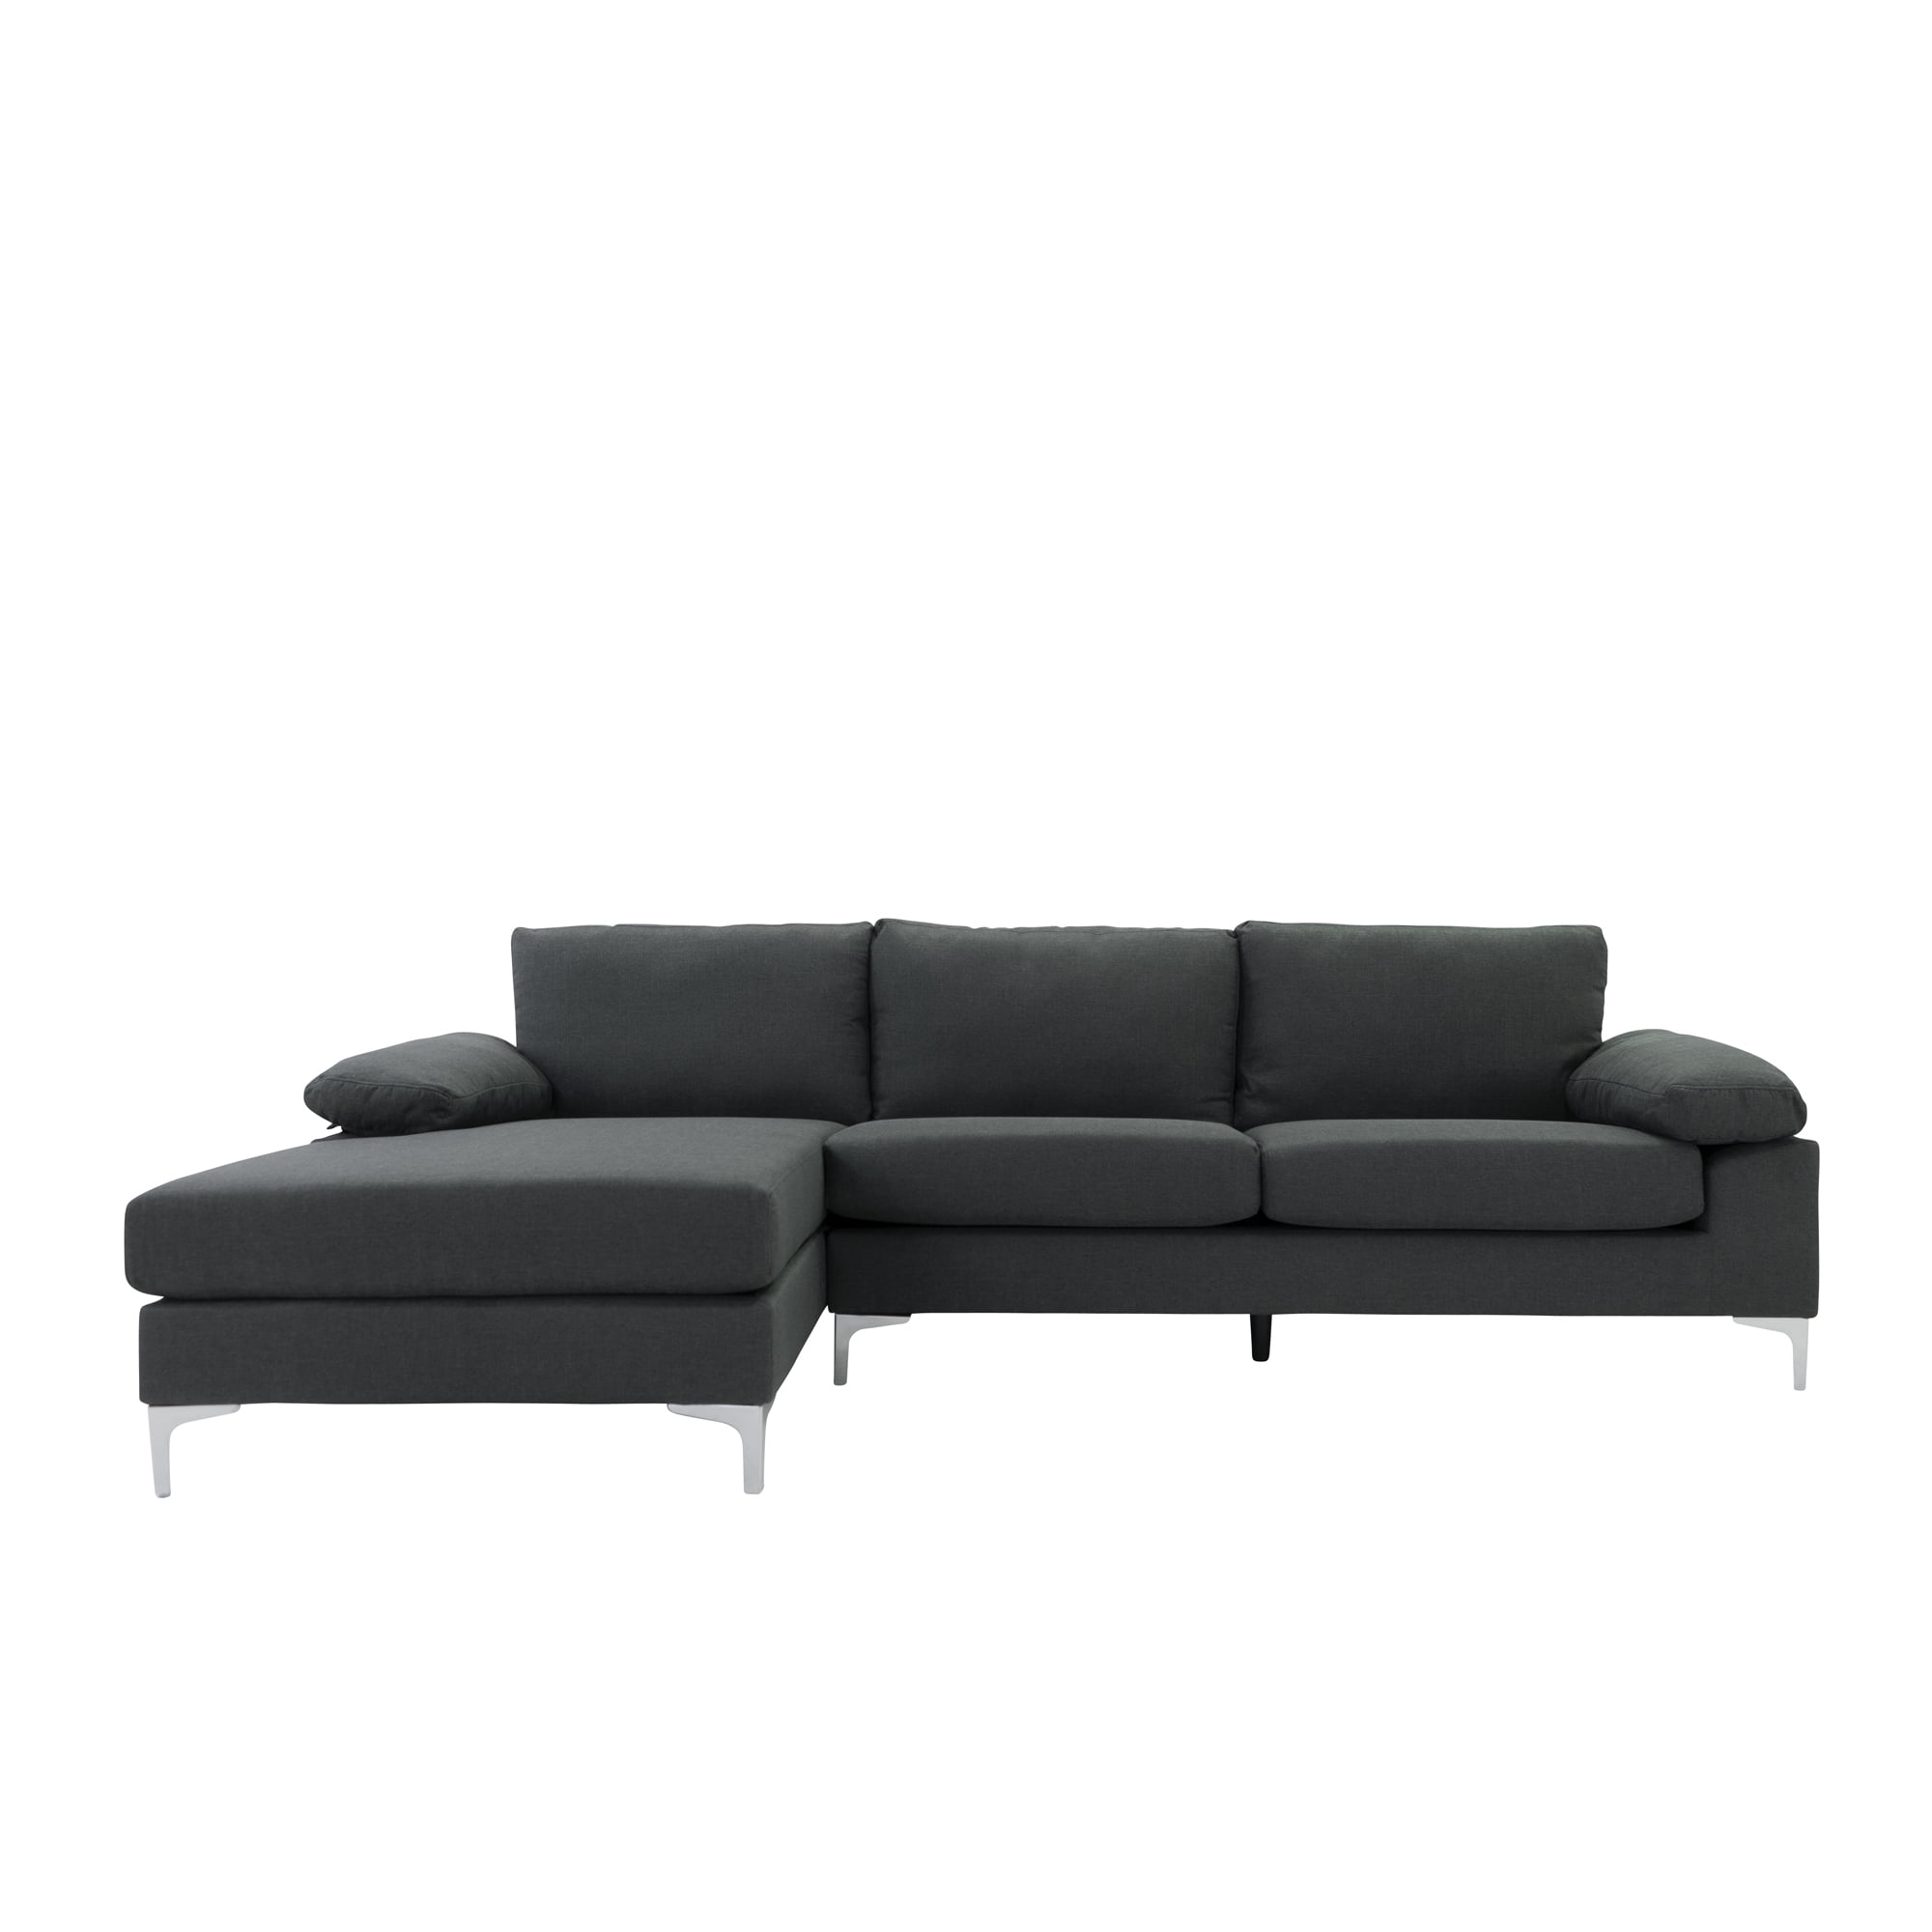 Mobilis 101 Modern Low Profile, Low Profile Velvet Sectional Sofa With Left Facing Chaise